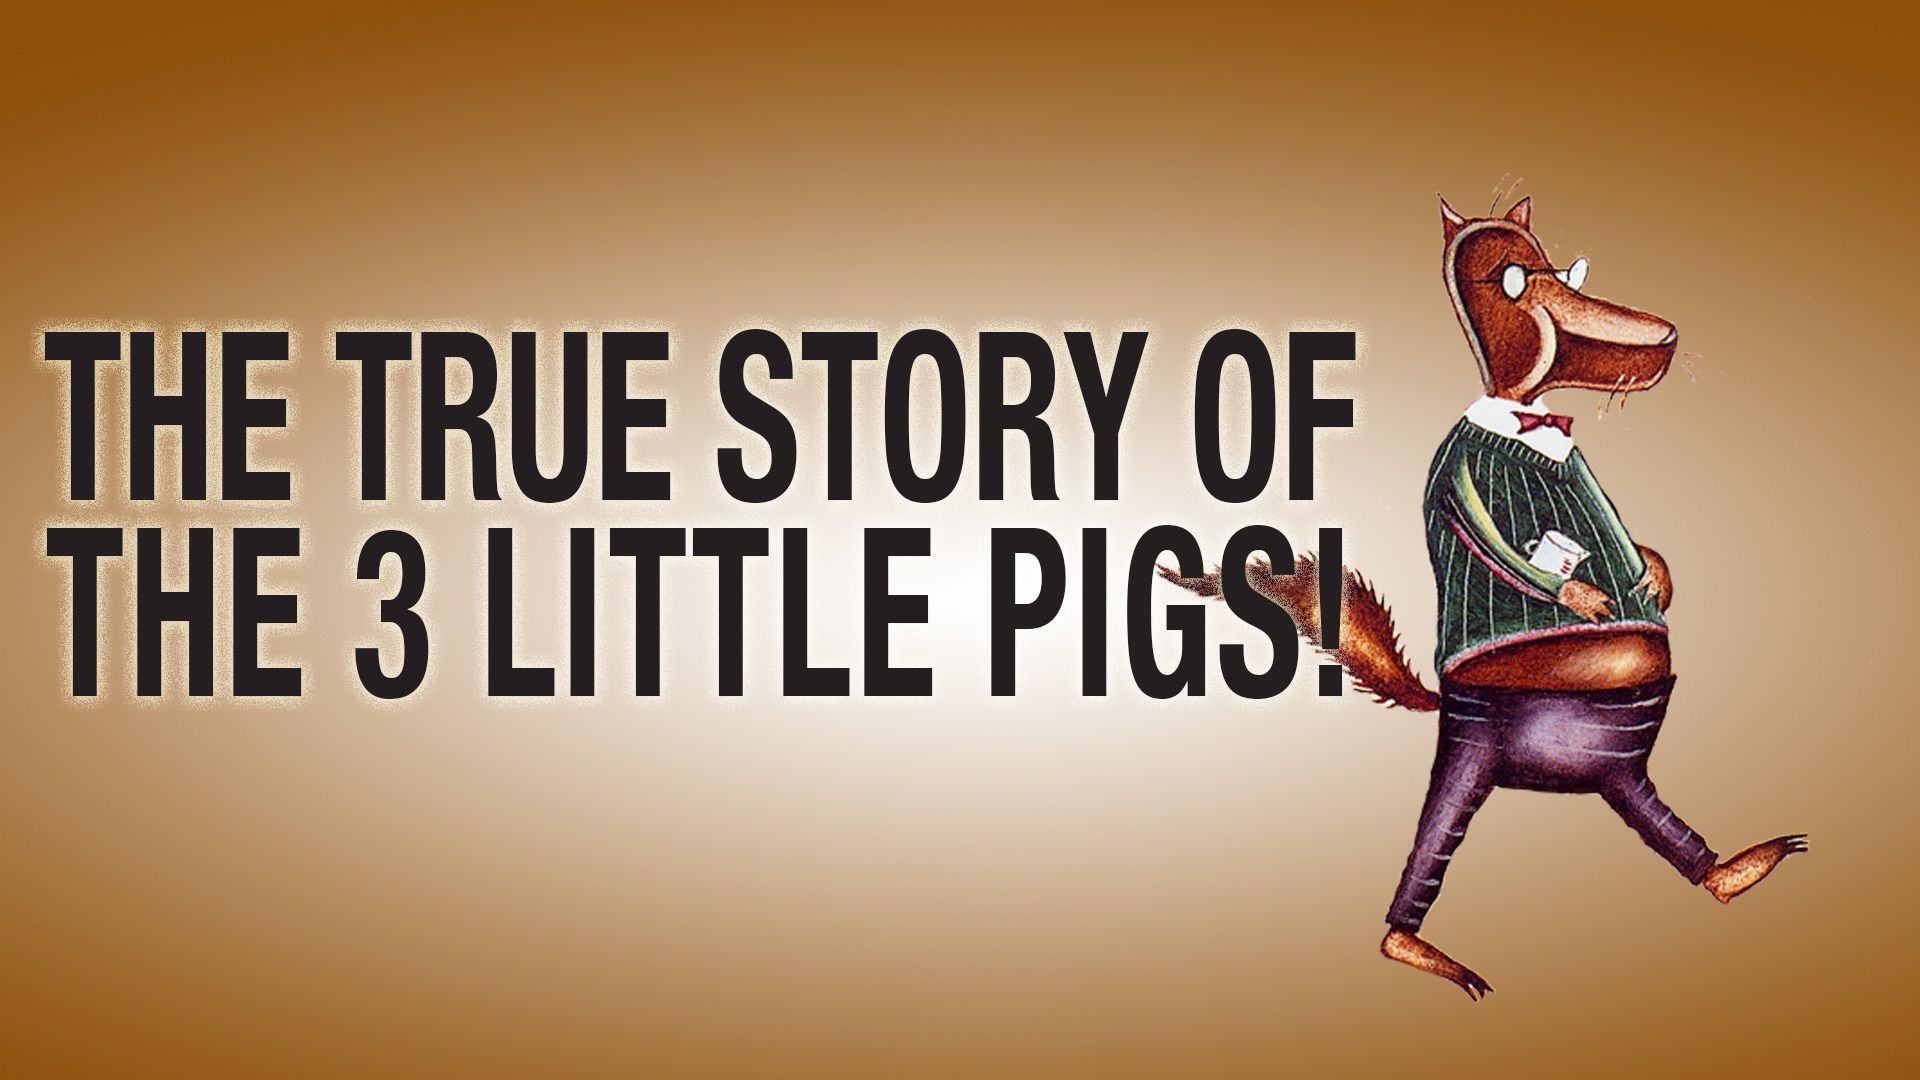 The True Story of the 3 Little Pigs! Backdrop